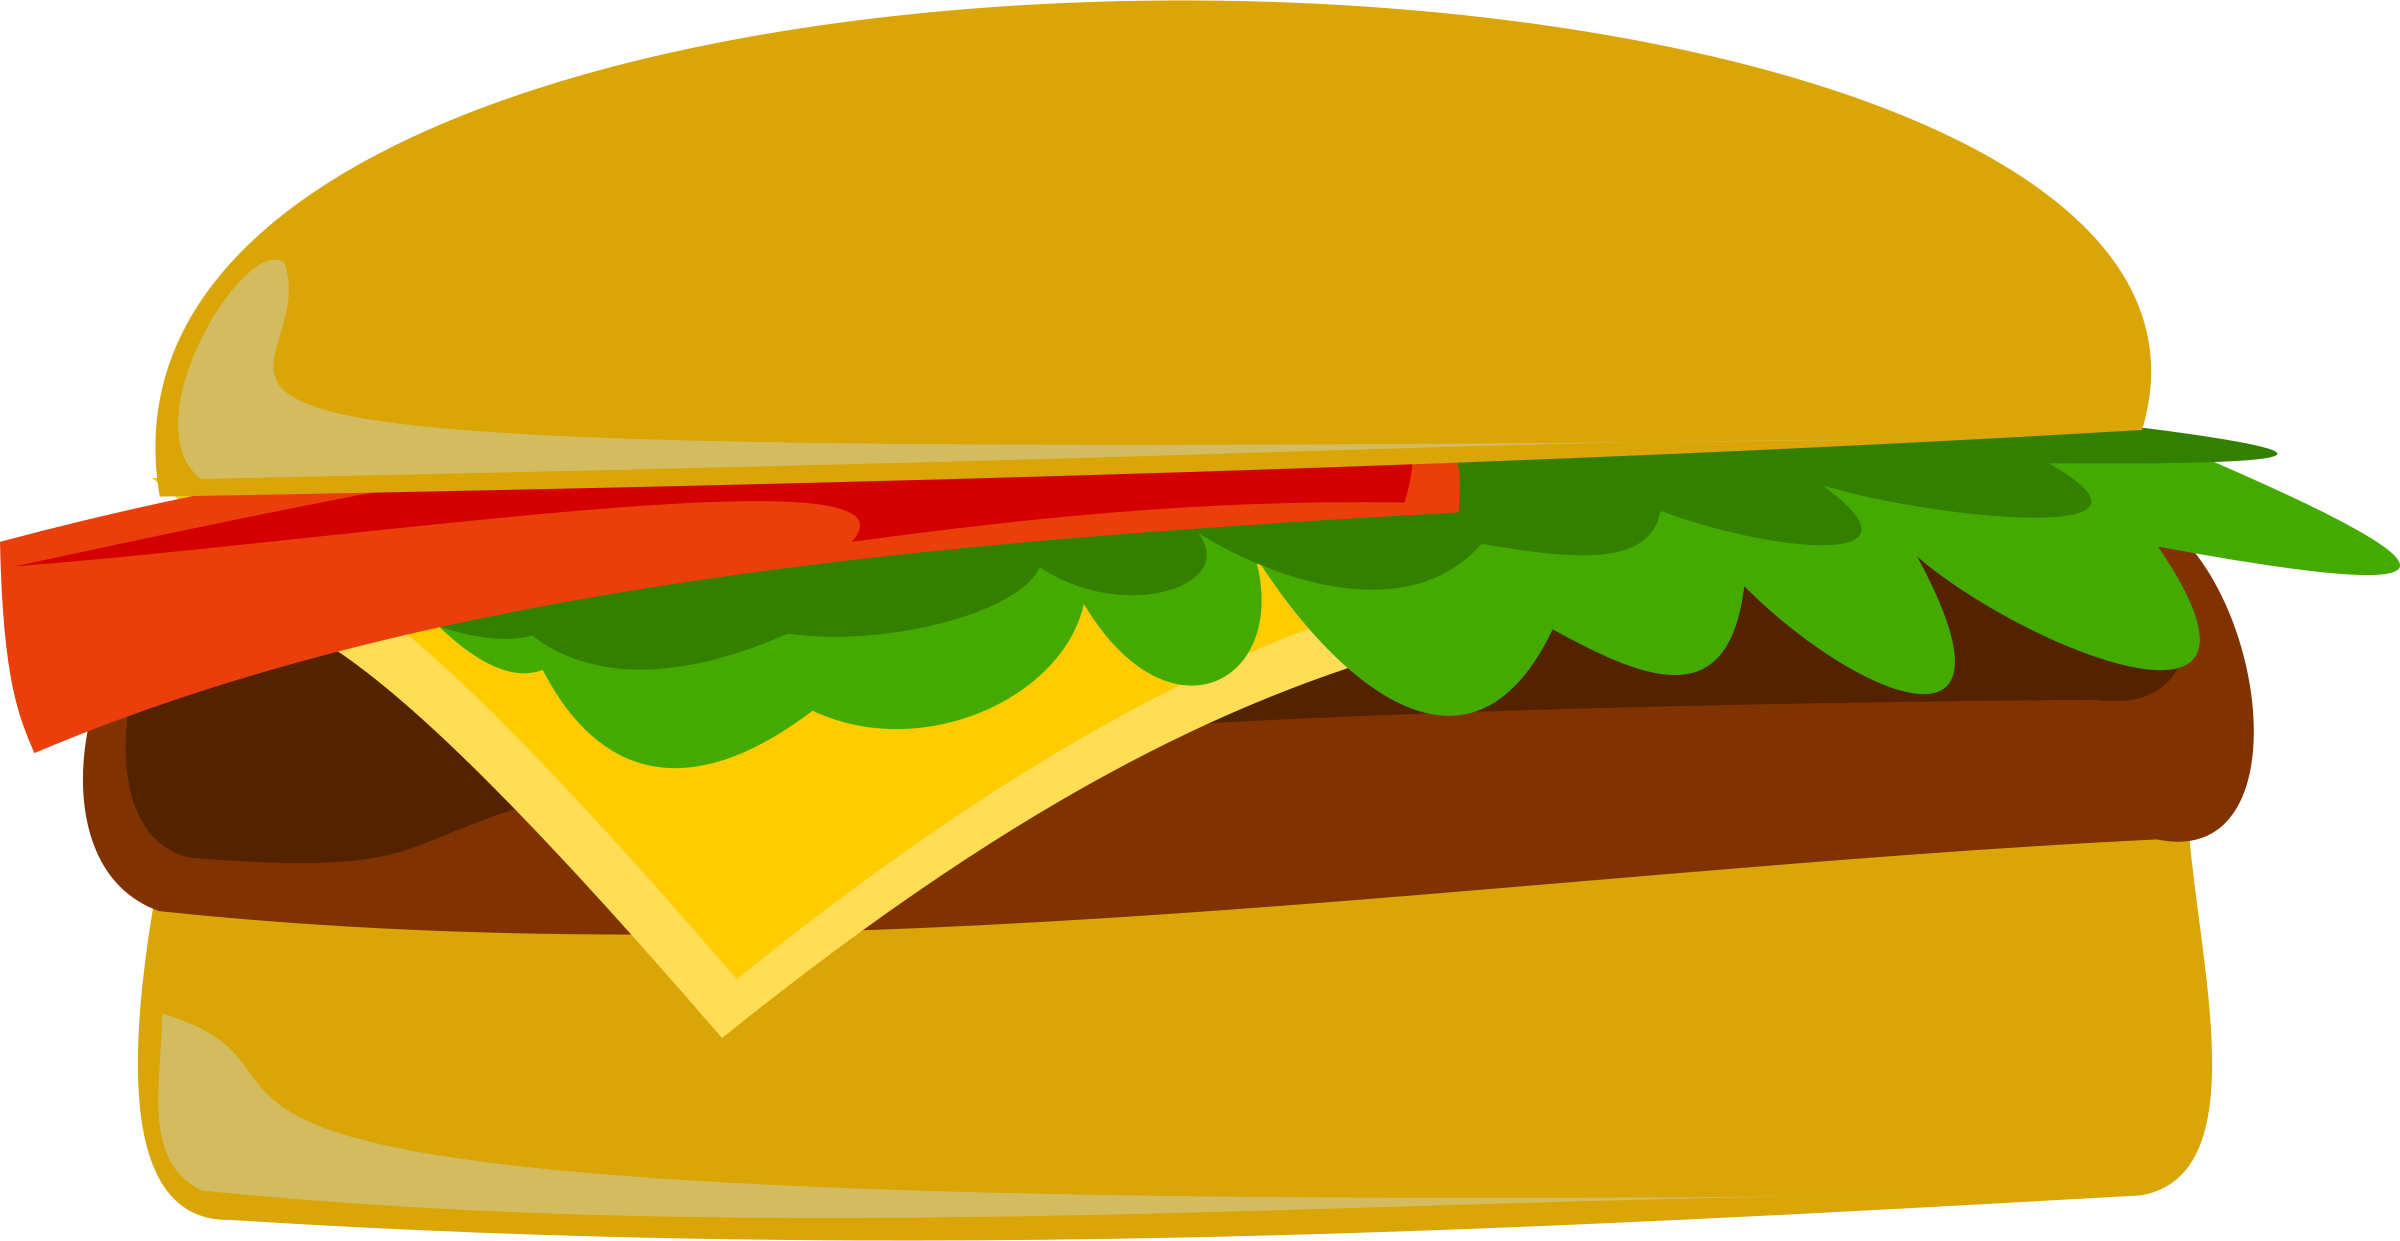 Hamburger vector clipart with transparent background